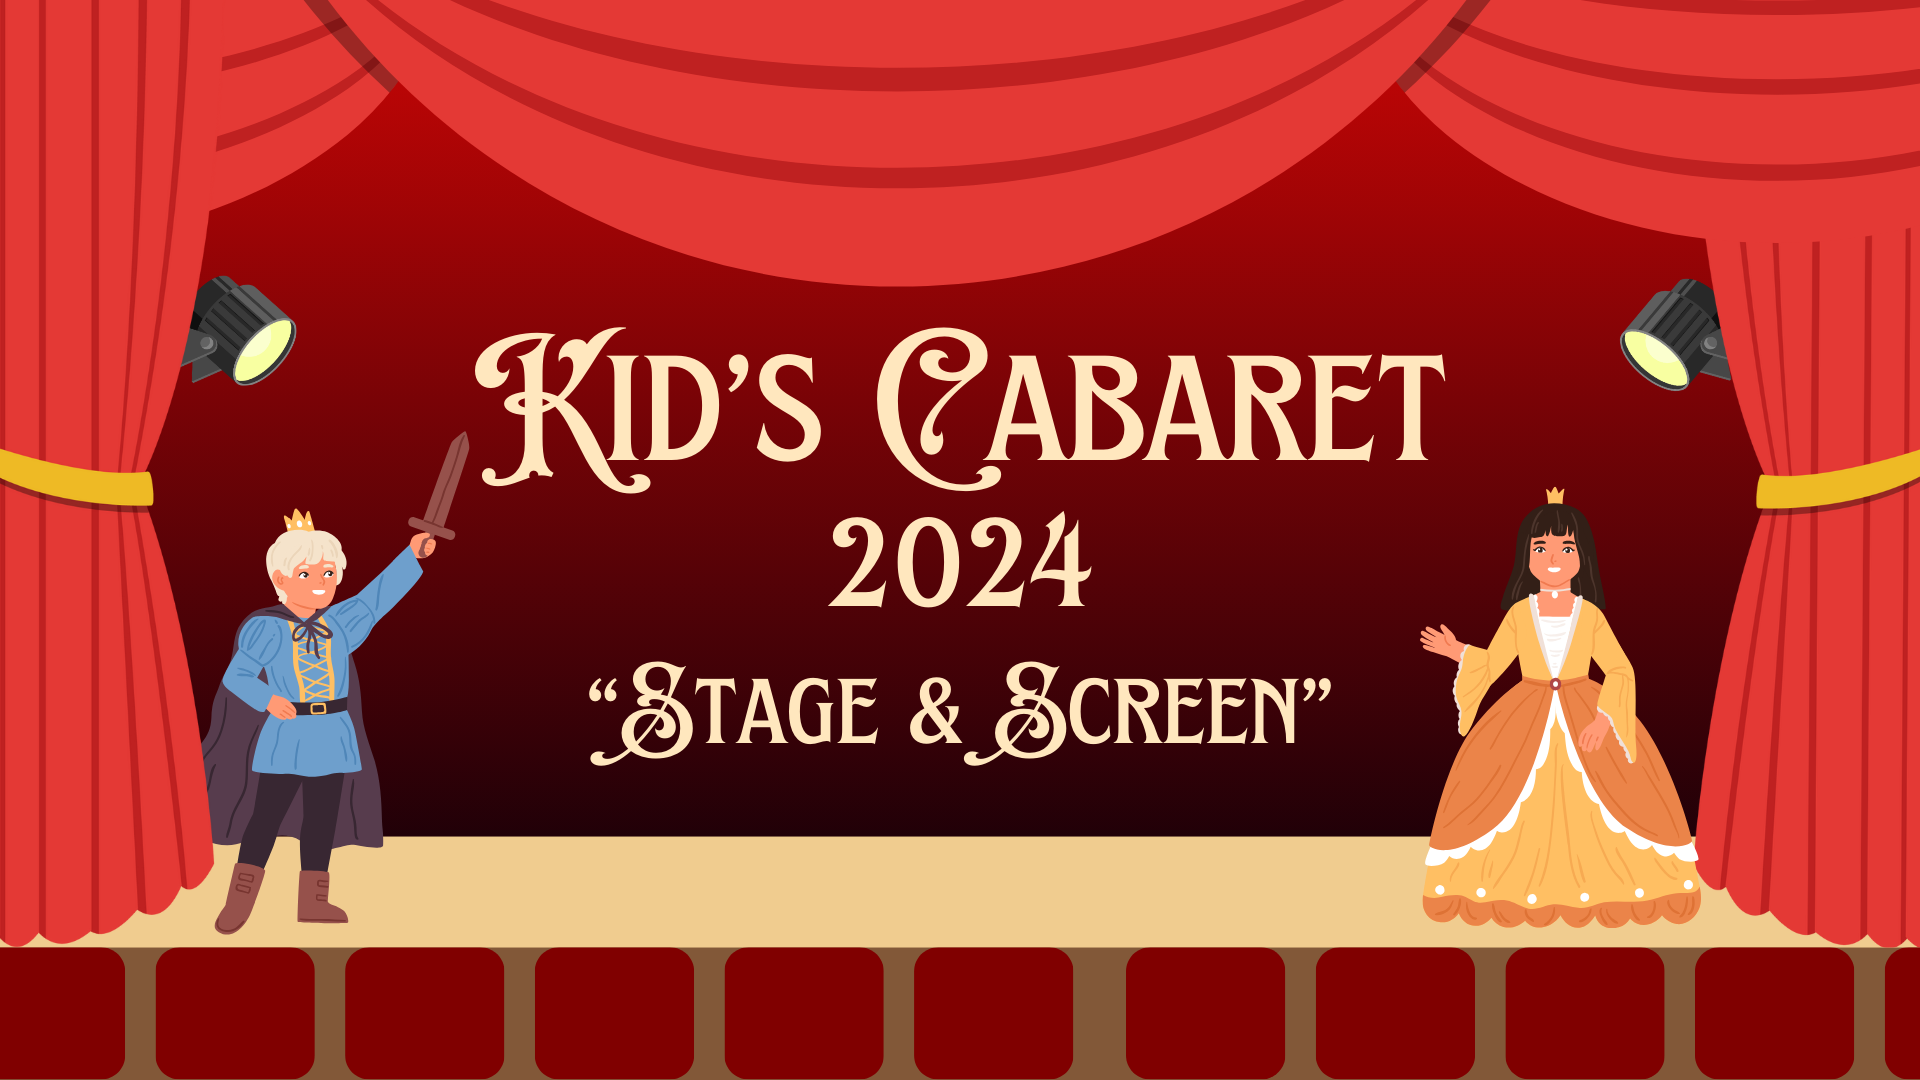 A cartoonish image of a stage with red curtains with TEXT: Kid's Cabaret 2024 "Stage and Screen" and two actors one inexplicably holding a sword and the other in an awful yellow and orange ball gown